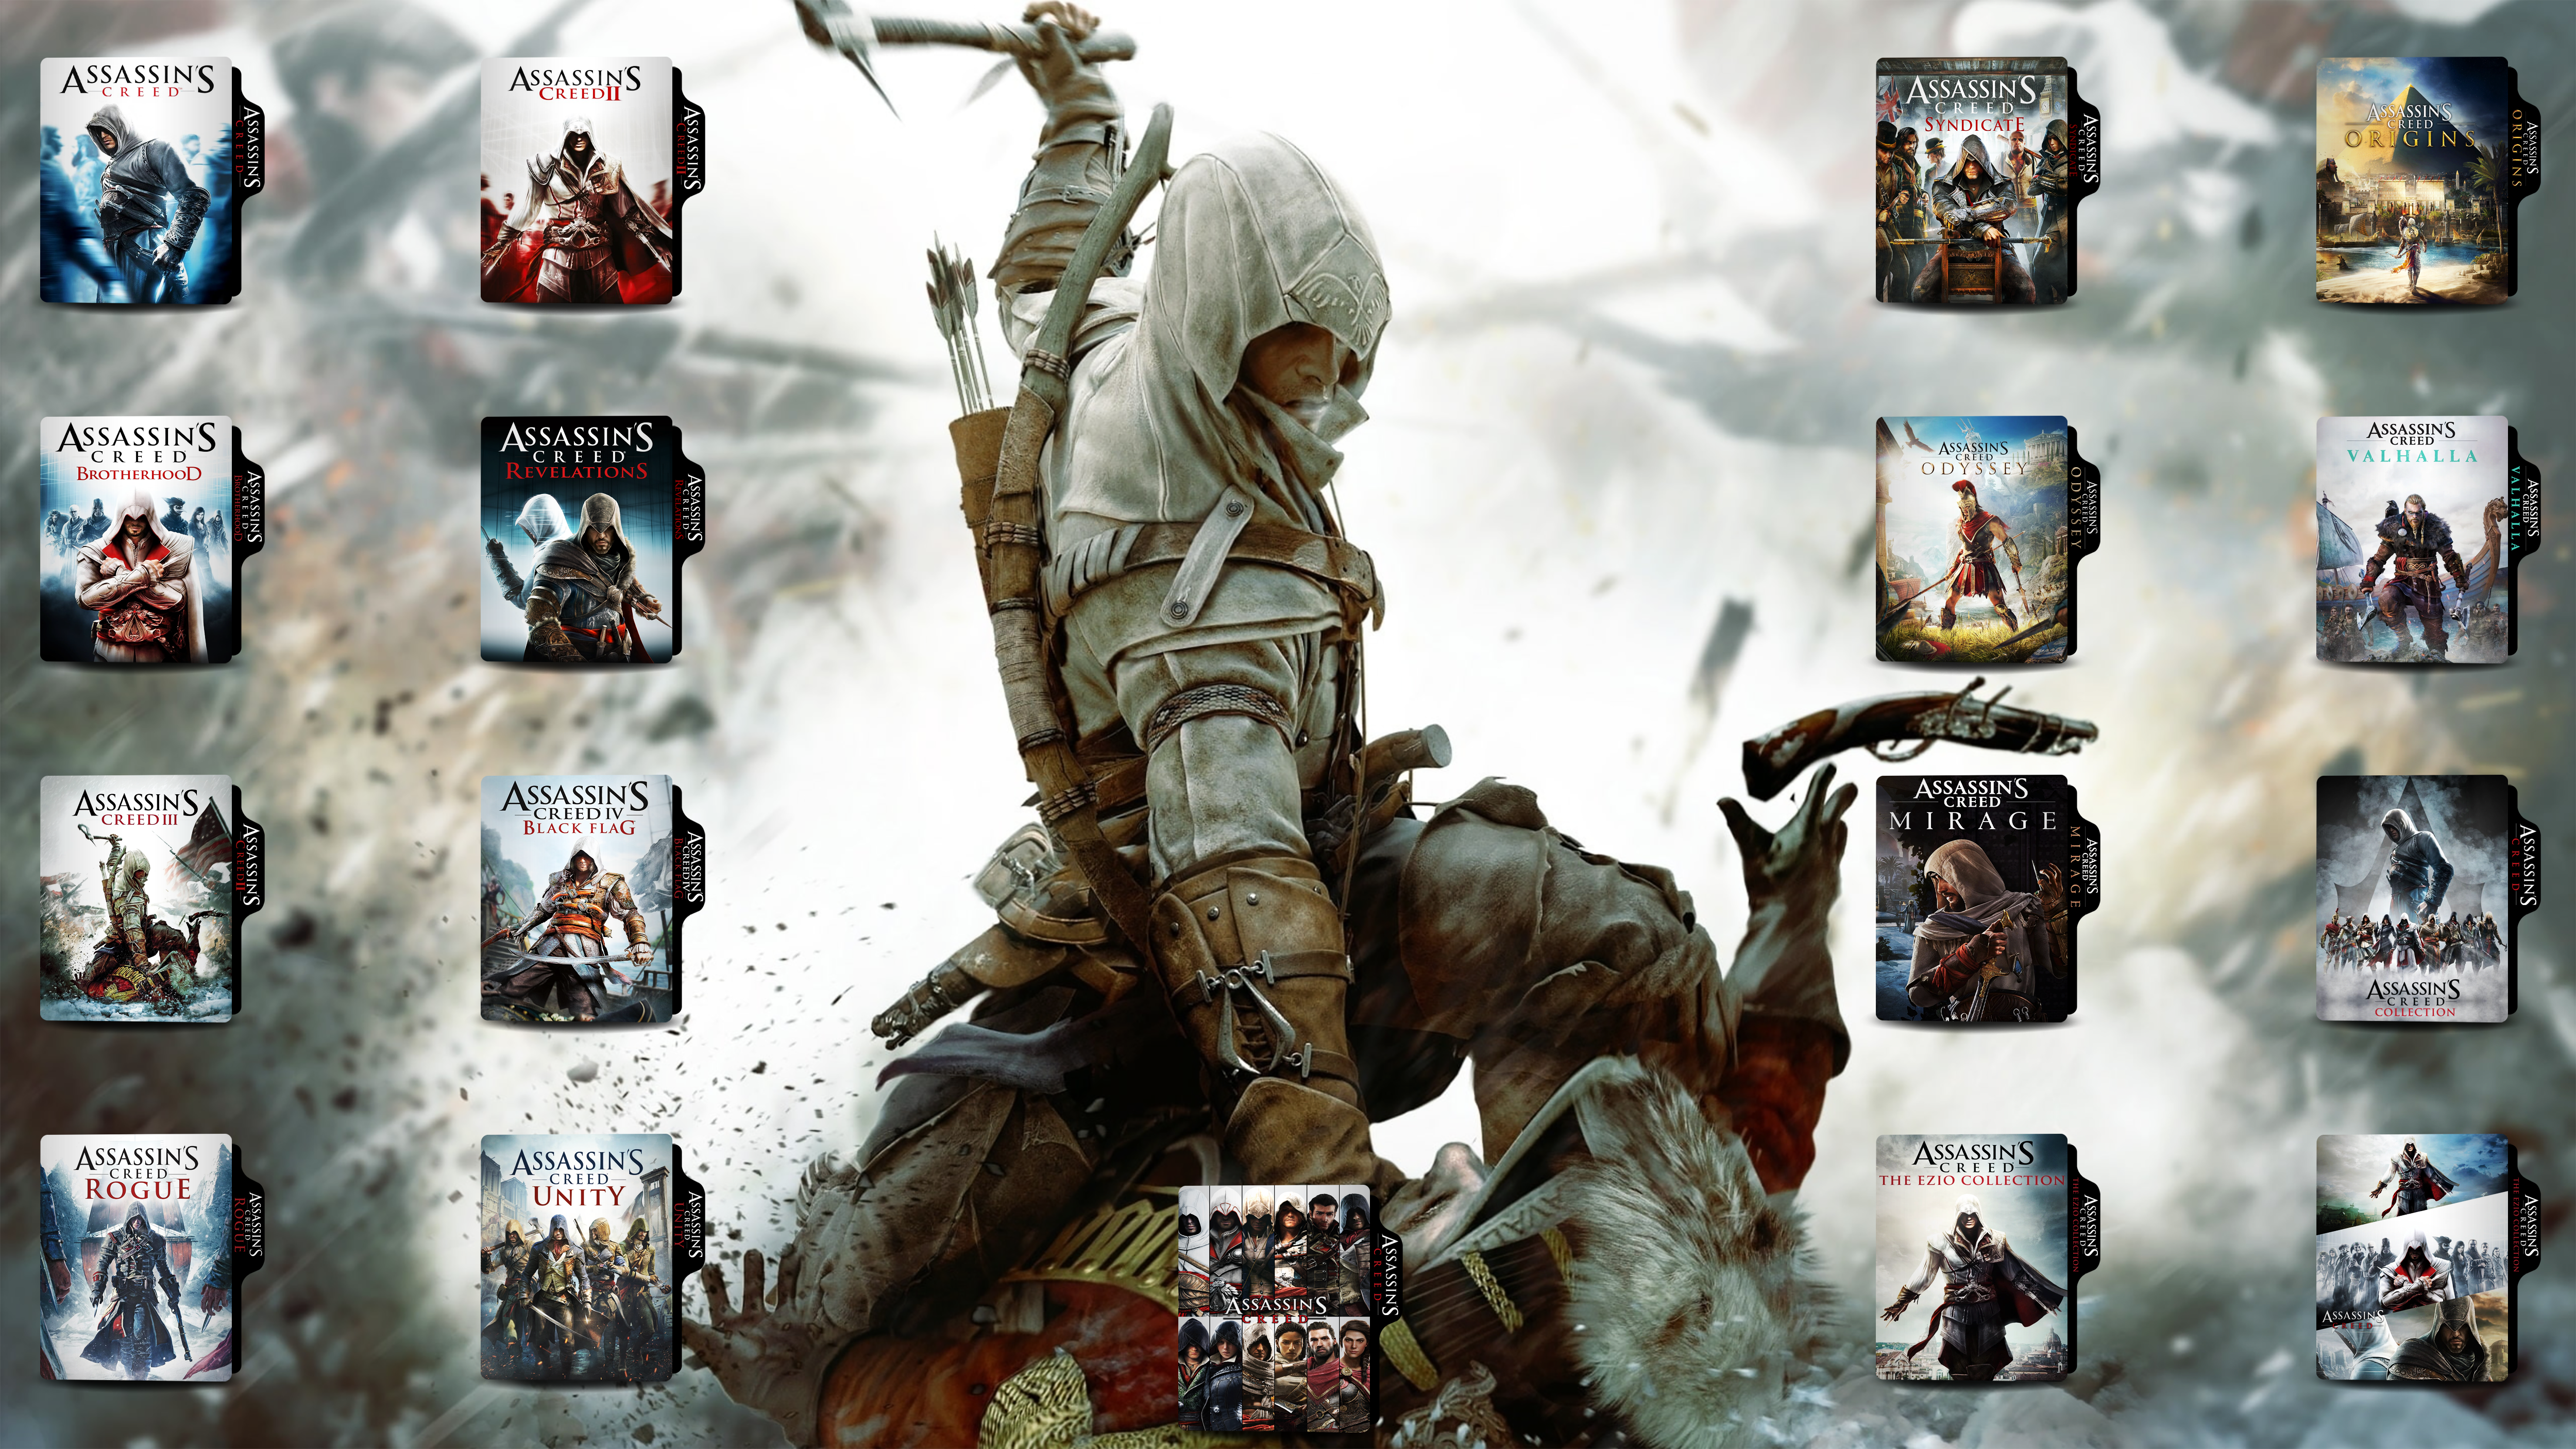 Assassin s Creed II 5 Icon, Mega Games Pack 33 Iconpack